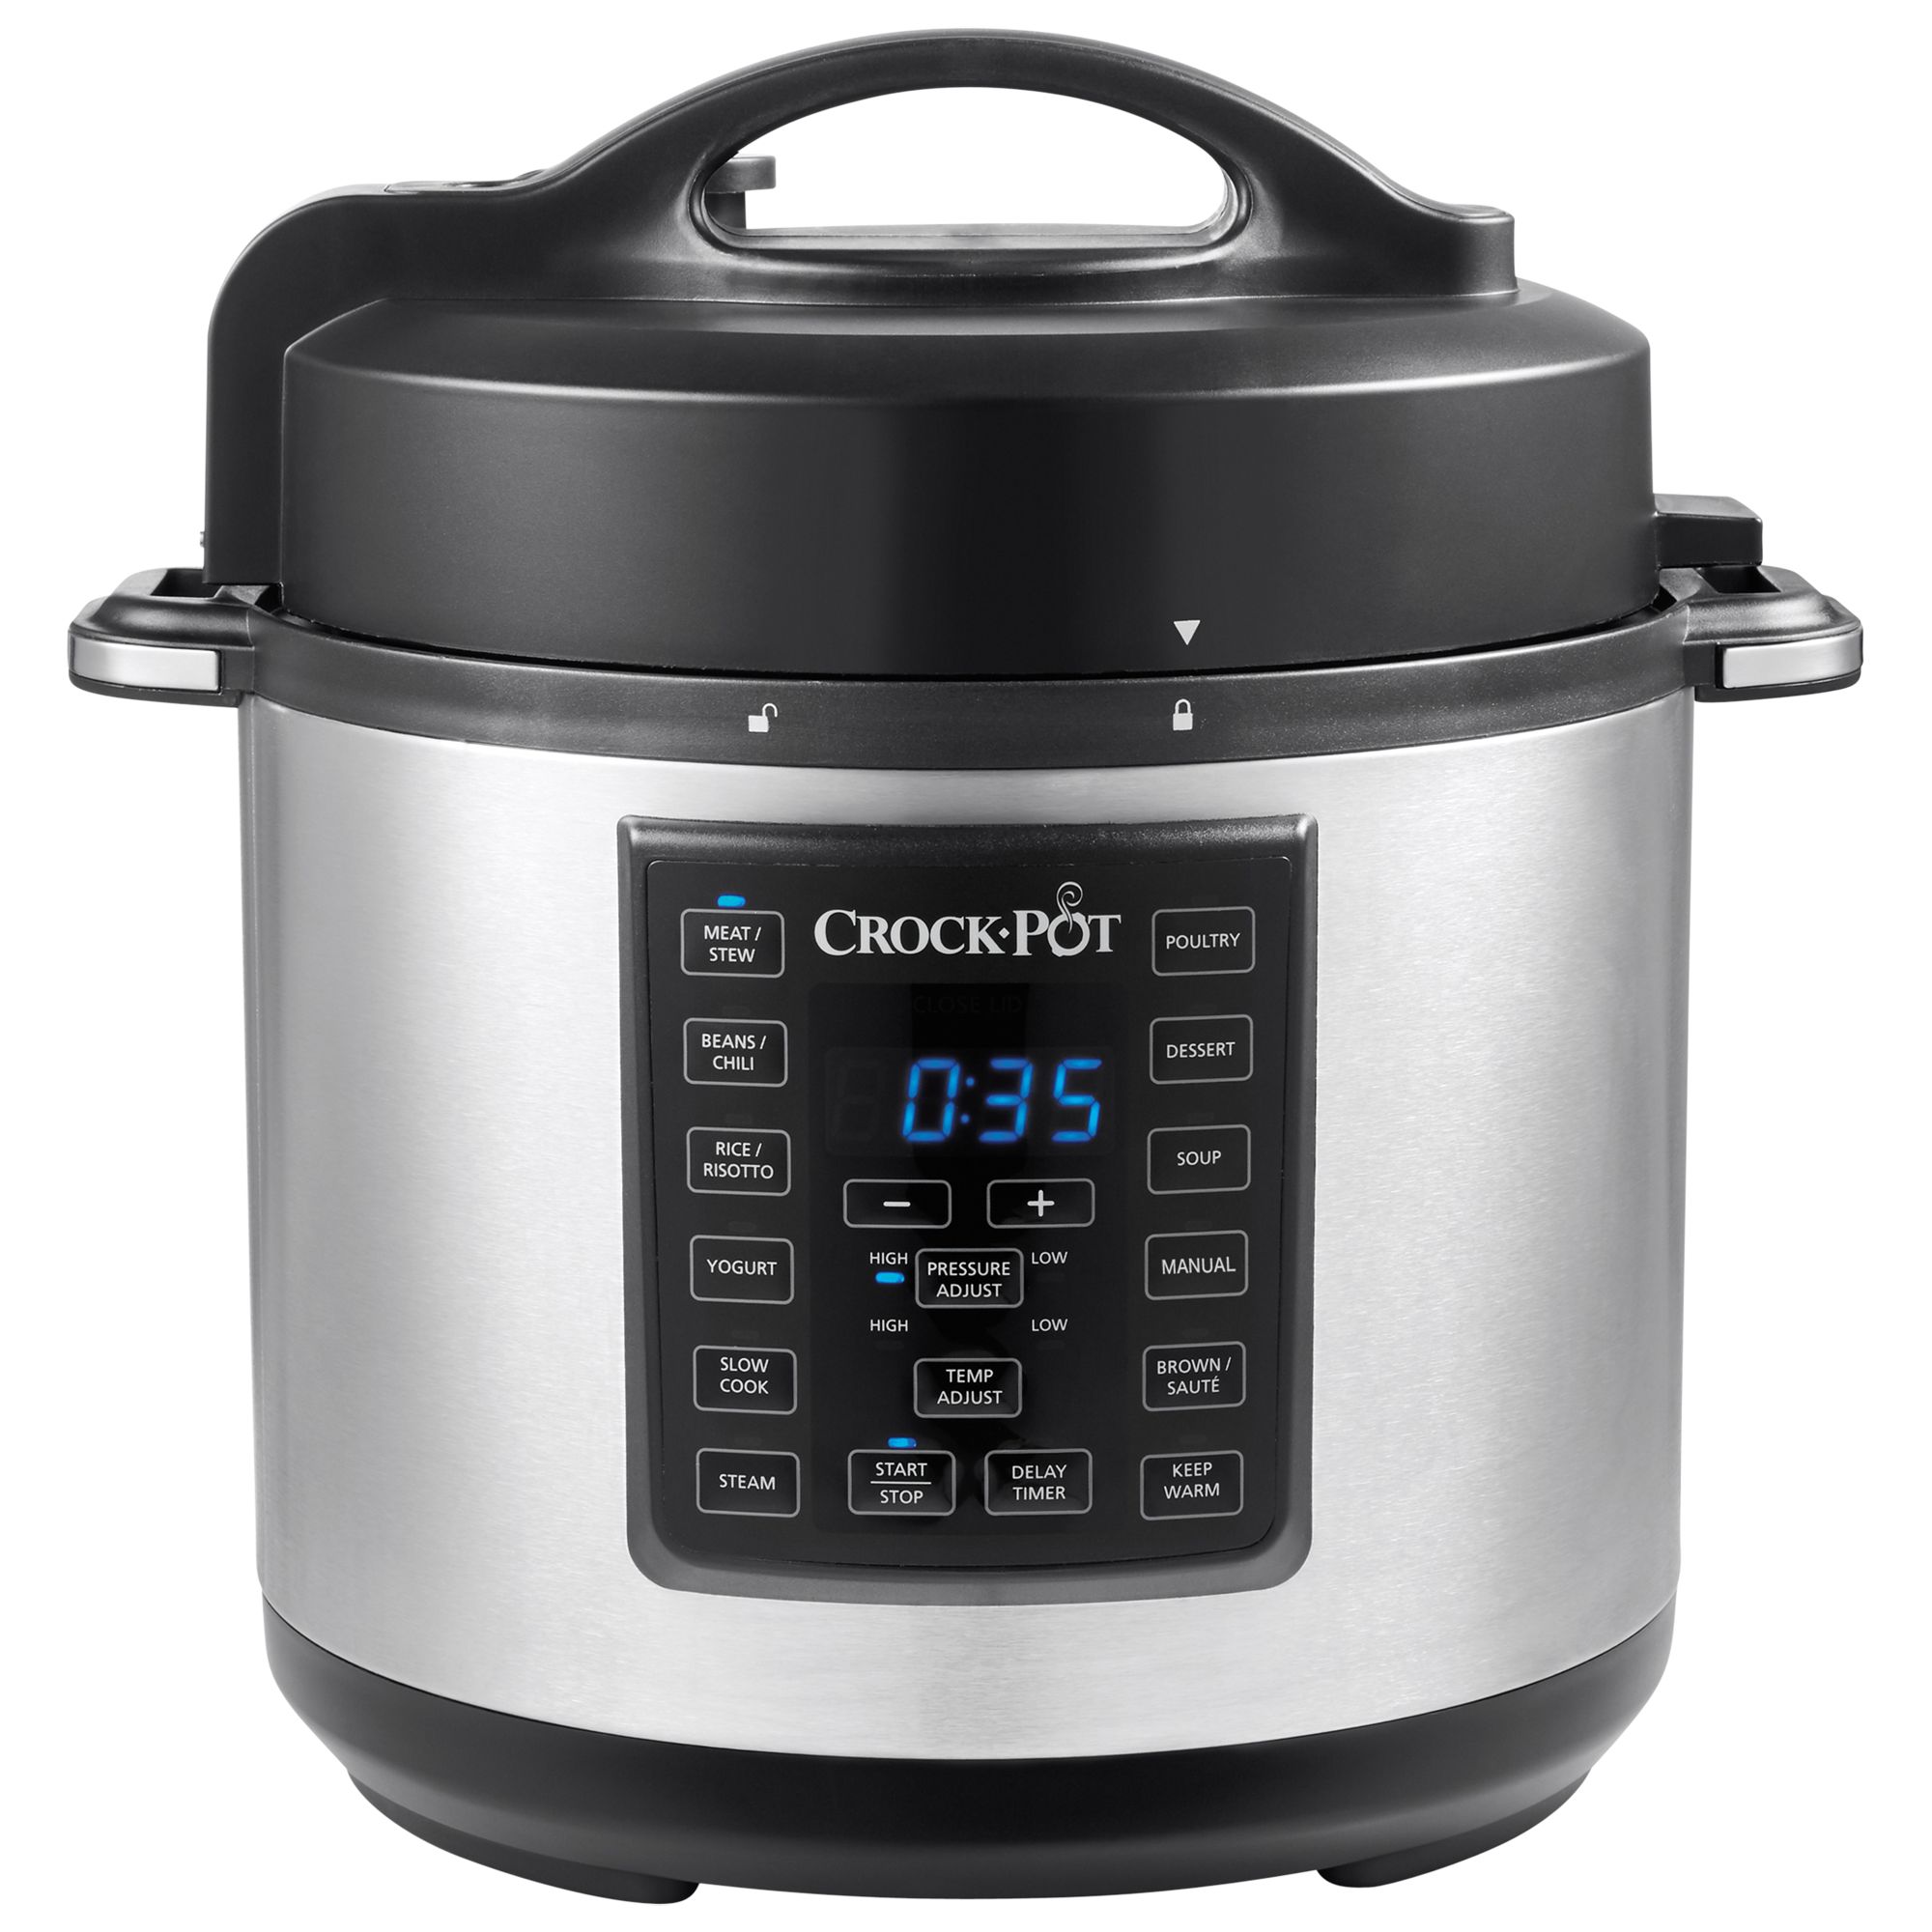 Crock-Pot CSC051 Electric Pressure & Multi-Cooker, 5.6L, Stainless Steel